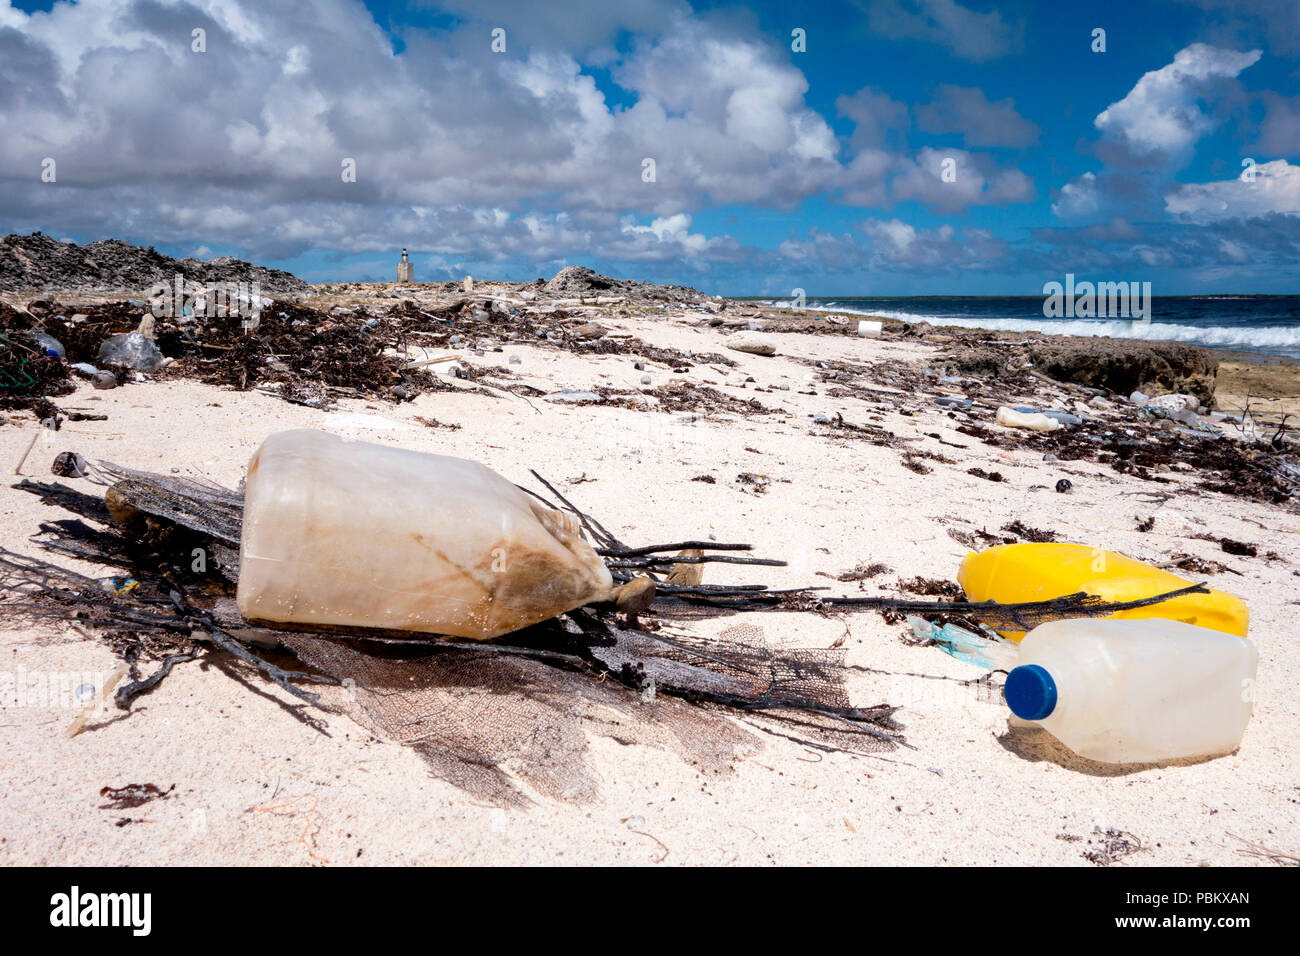 Garbage washed up on the shore of an island in the Caribbean Stock Photo